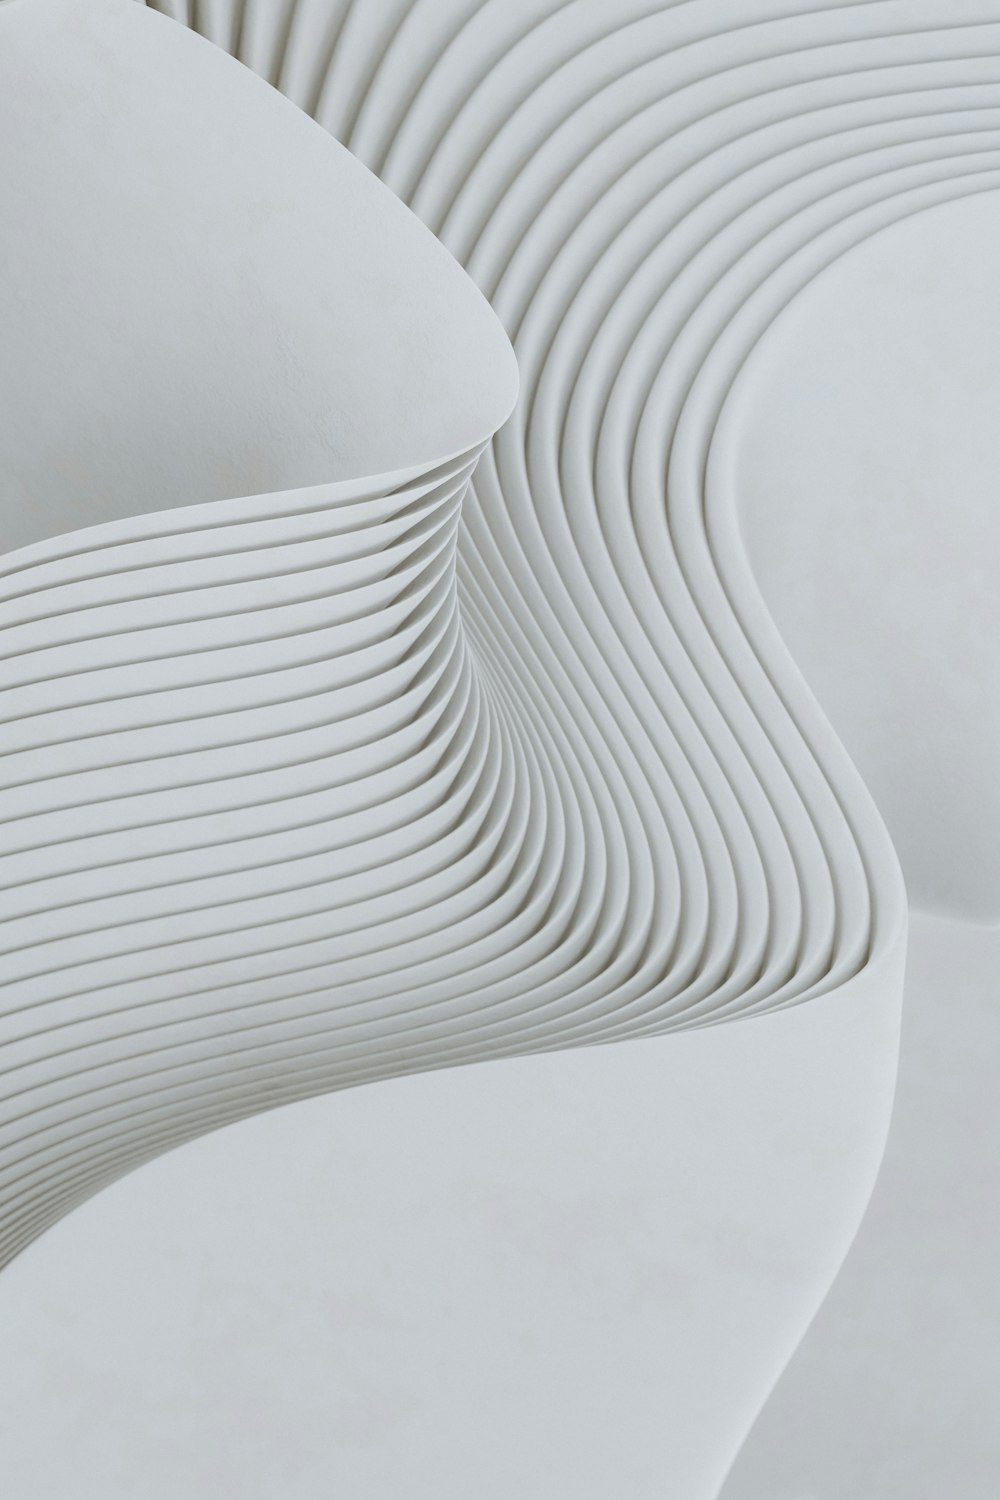 a close up of a white sculpture with wavy lines